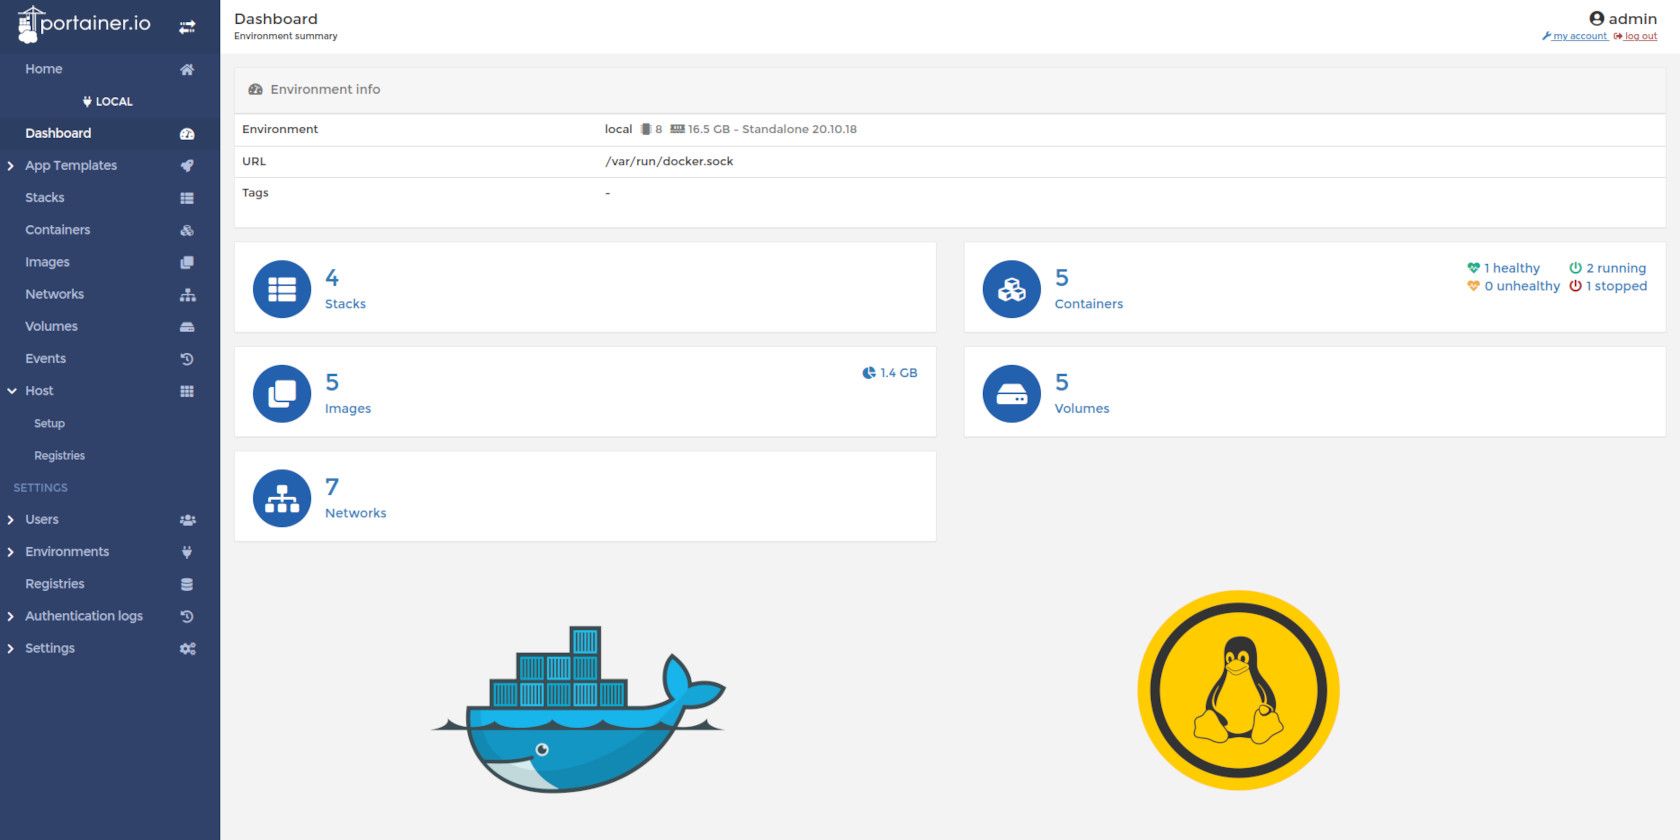 Getting Started With Portainer: A GUI Manager for Docker on Linux